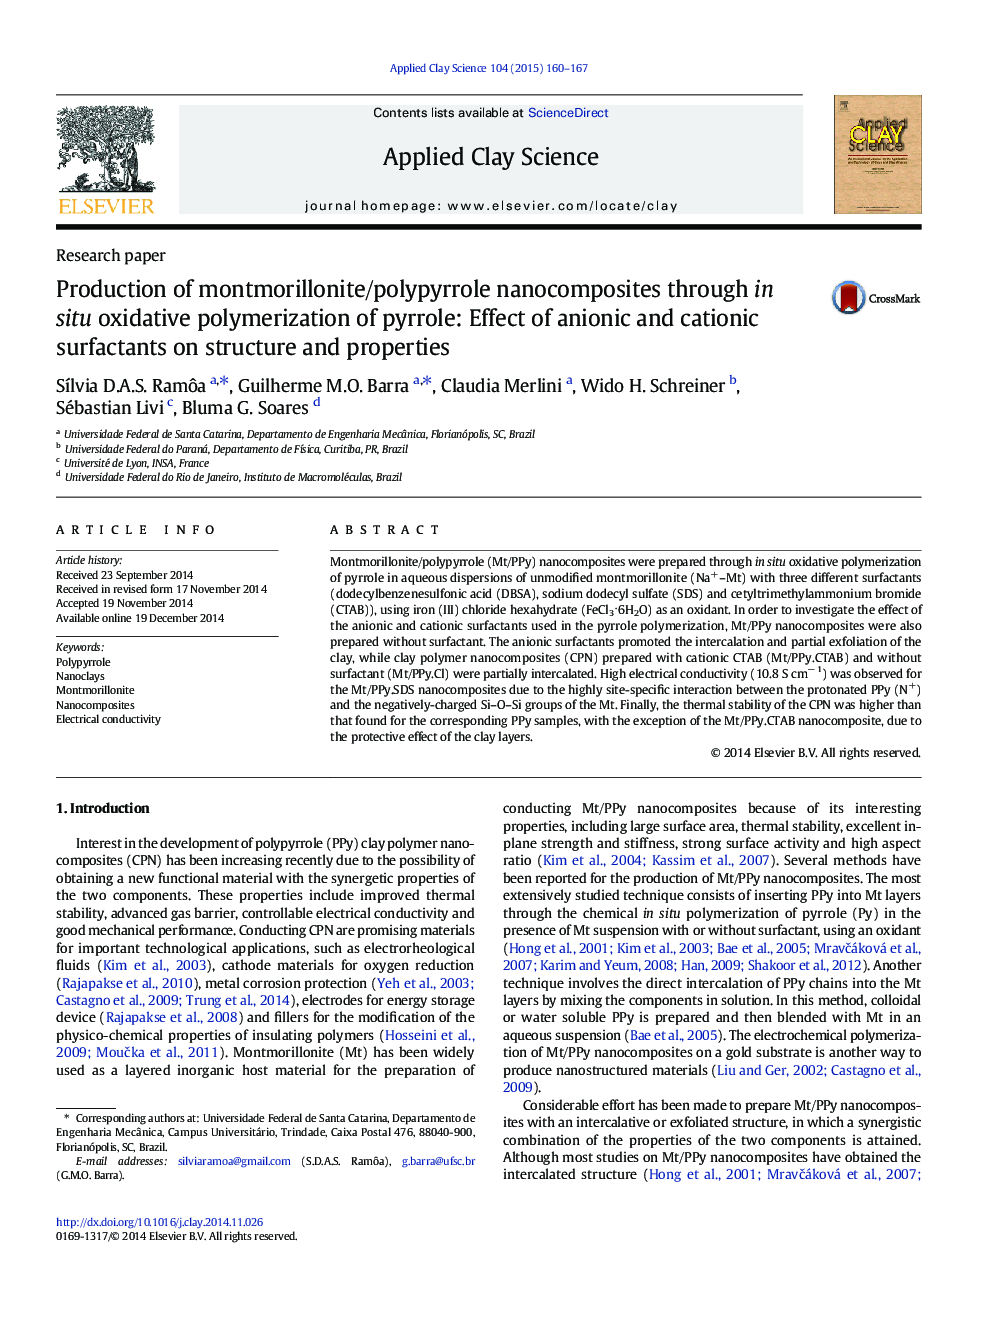 Production of montmorillonite/polypyrrole nanocomposites through in situ oxidative polymerization of pyrrole: Effect of anionic and cationic surfactants on structure and properties